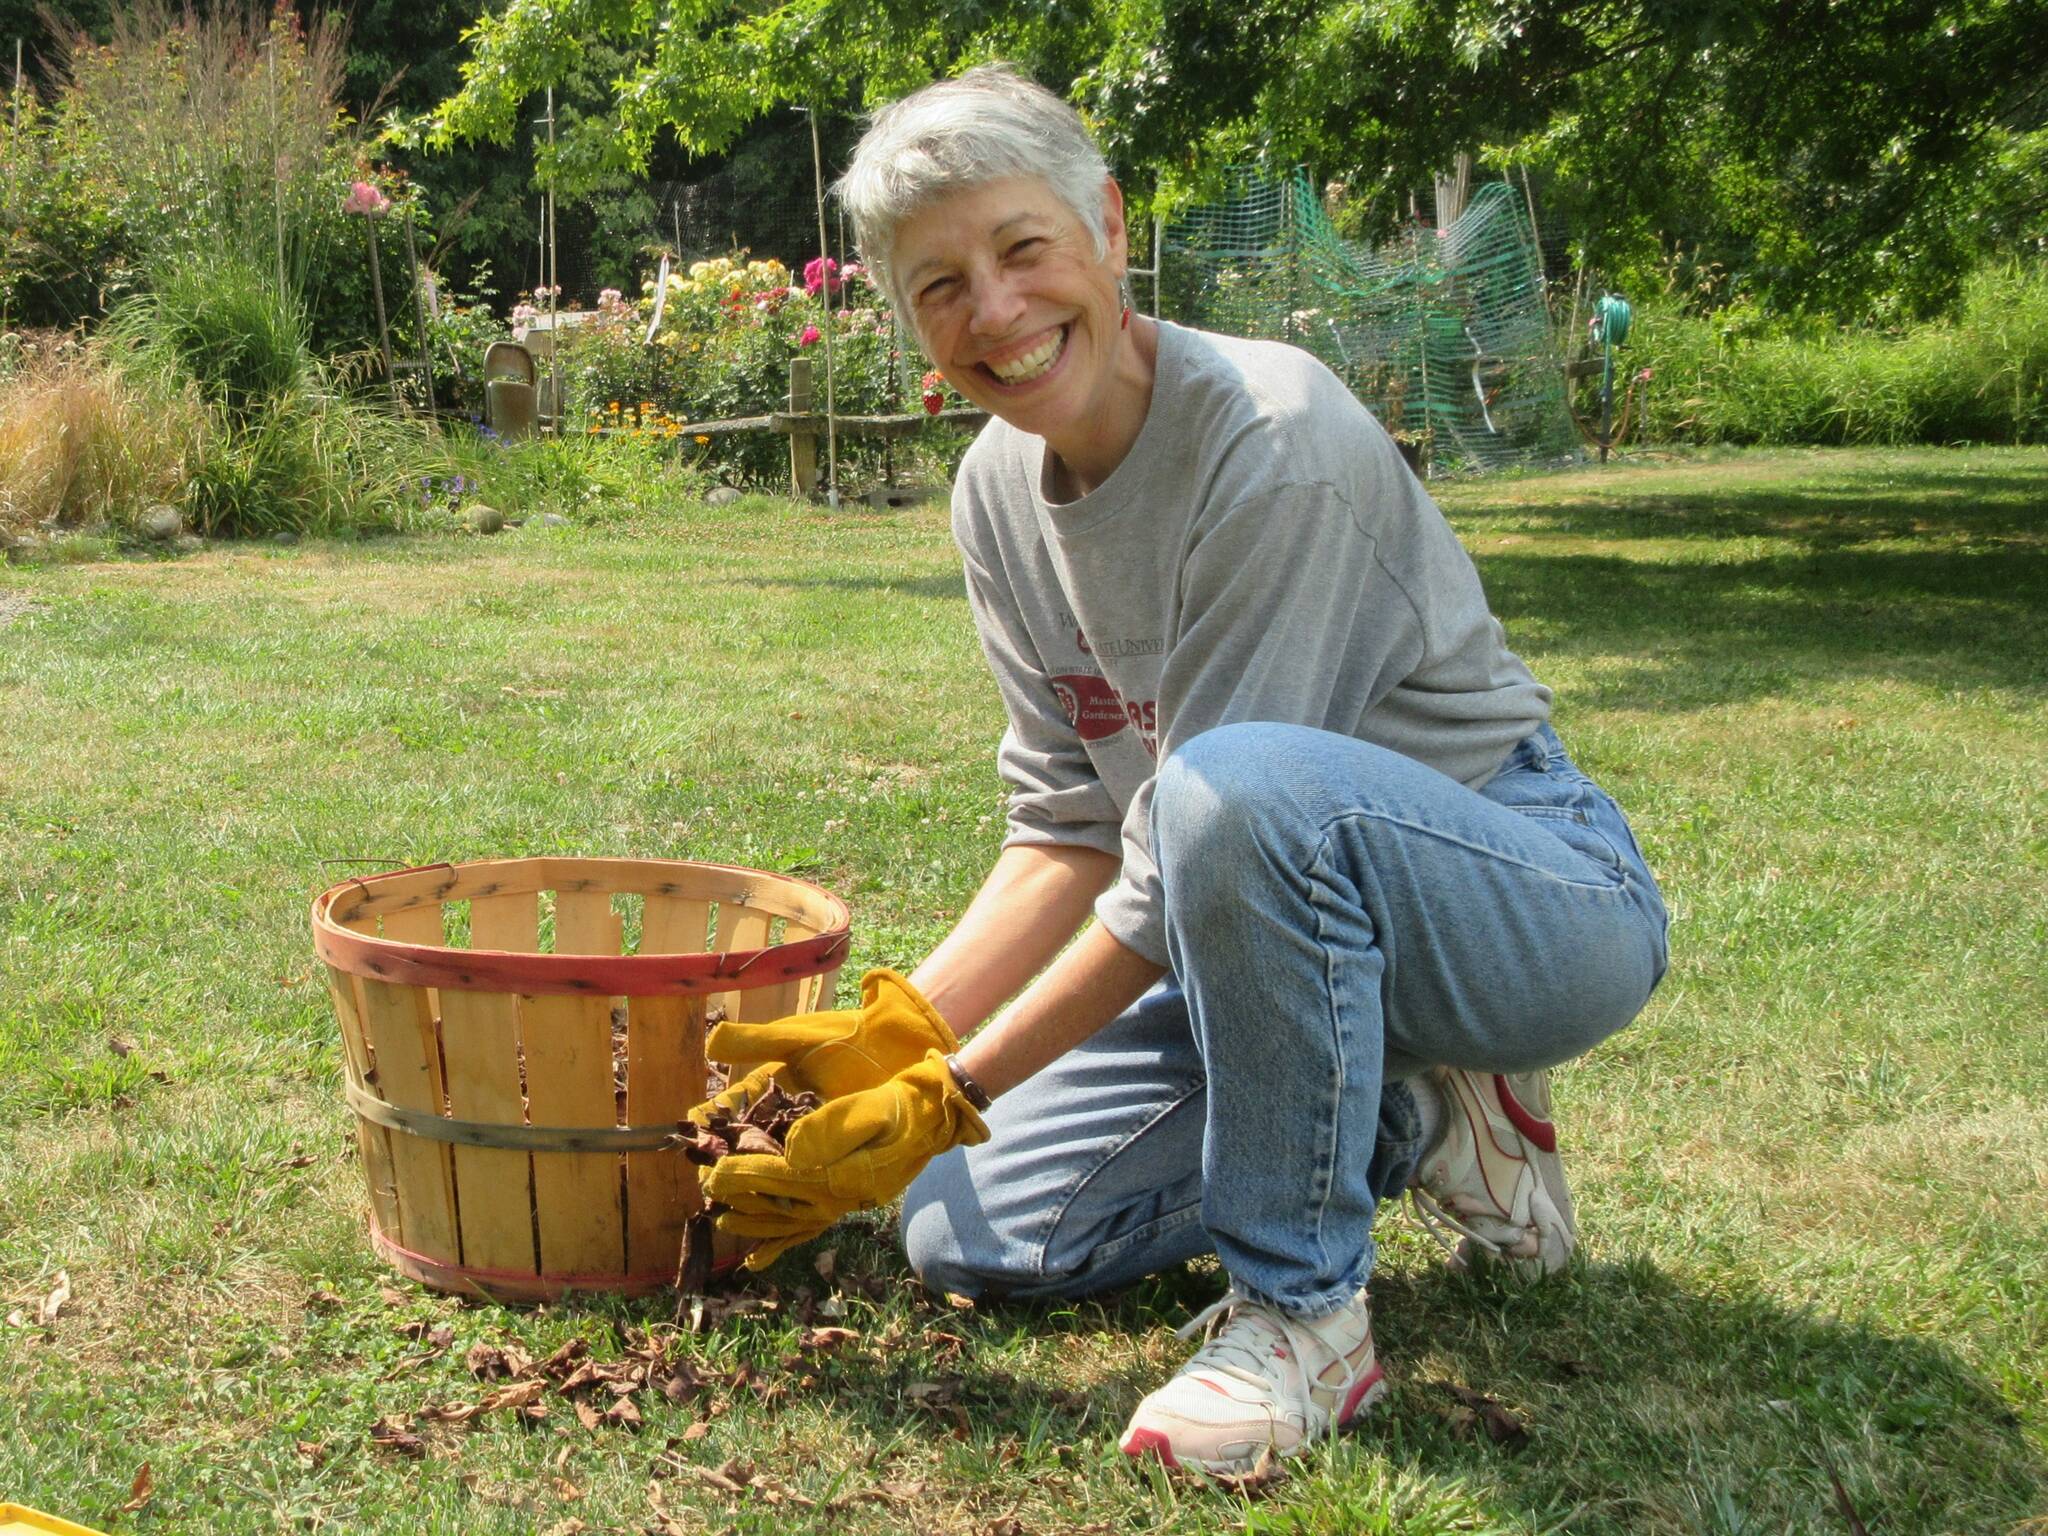 Summer is going fast, but a new burst of color is right around the corner! Join Clallam County Master Gardener Jeanette Stehr-Green for the Green Thumb Education Series presentation “Farewell to Summer: Autumn Leaves” and say hello to fabulous fall foliage Thursday, Sept. 14th from noon – 1 p.m. at the Port Angeles Library. (Photo by Audreen Williams, Clallam County Master Gardener).